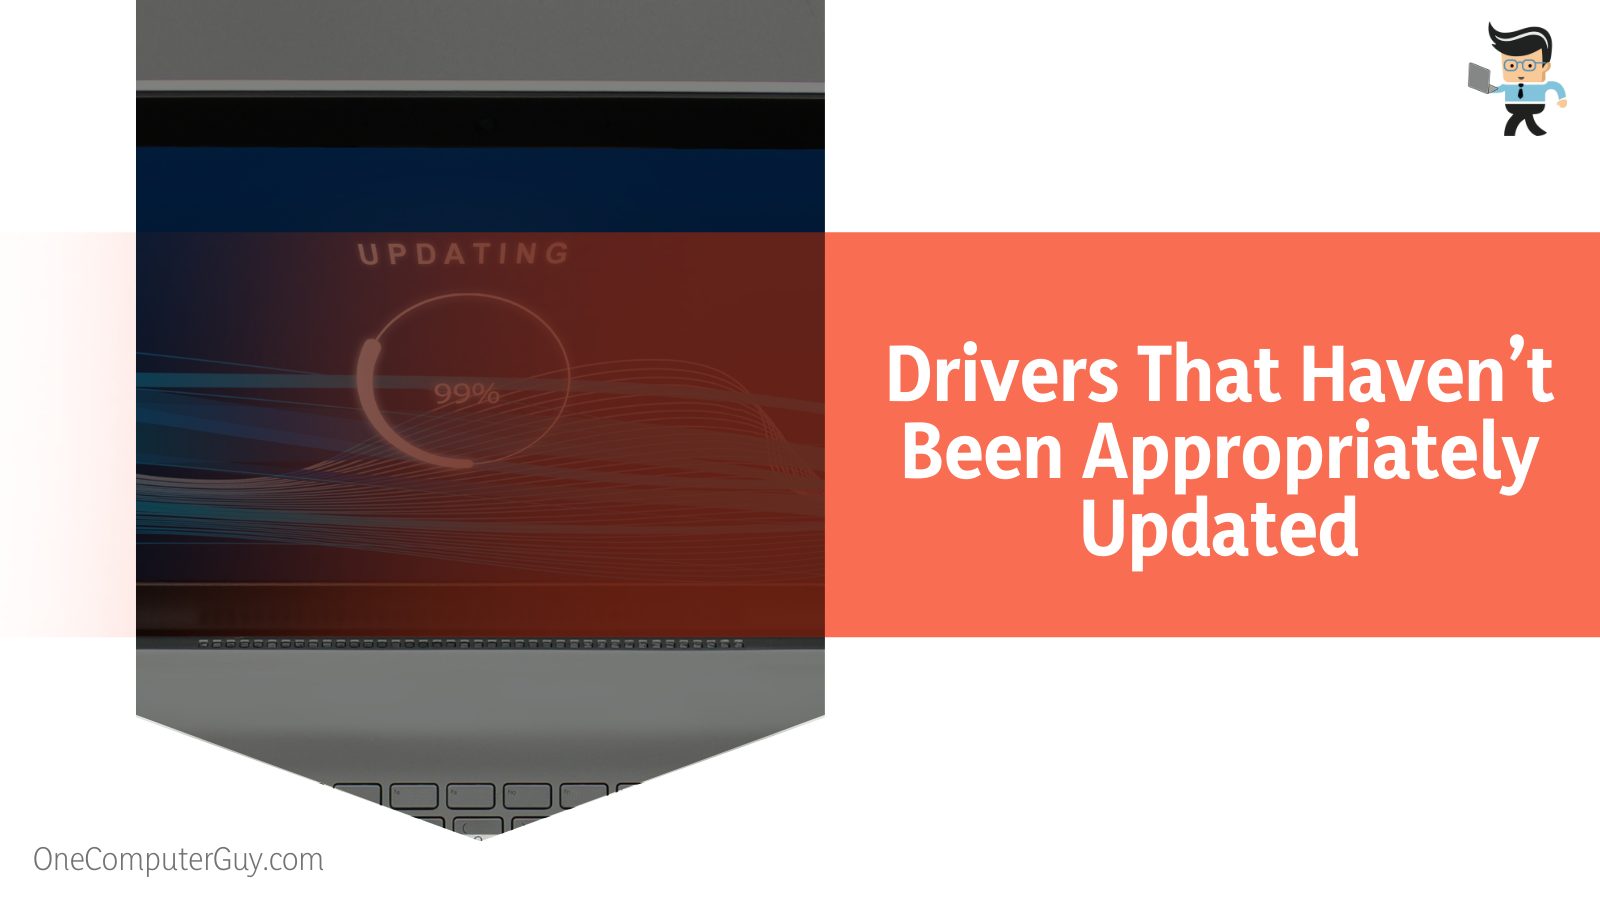 Drivers That Haven’t Been Appropriately Updated